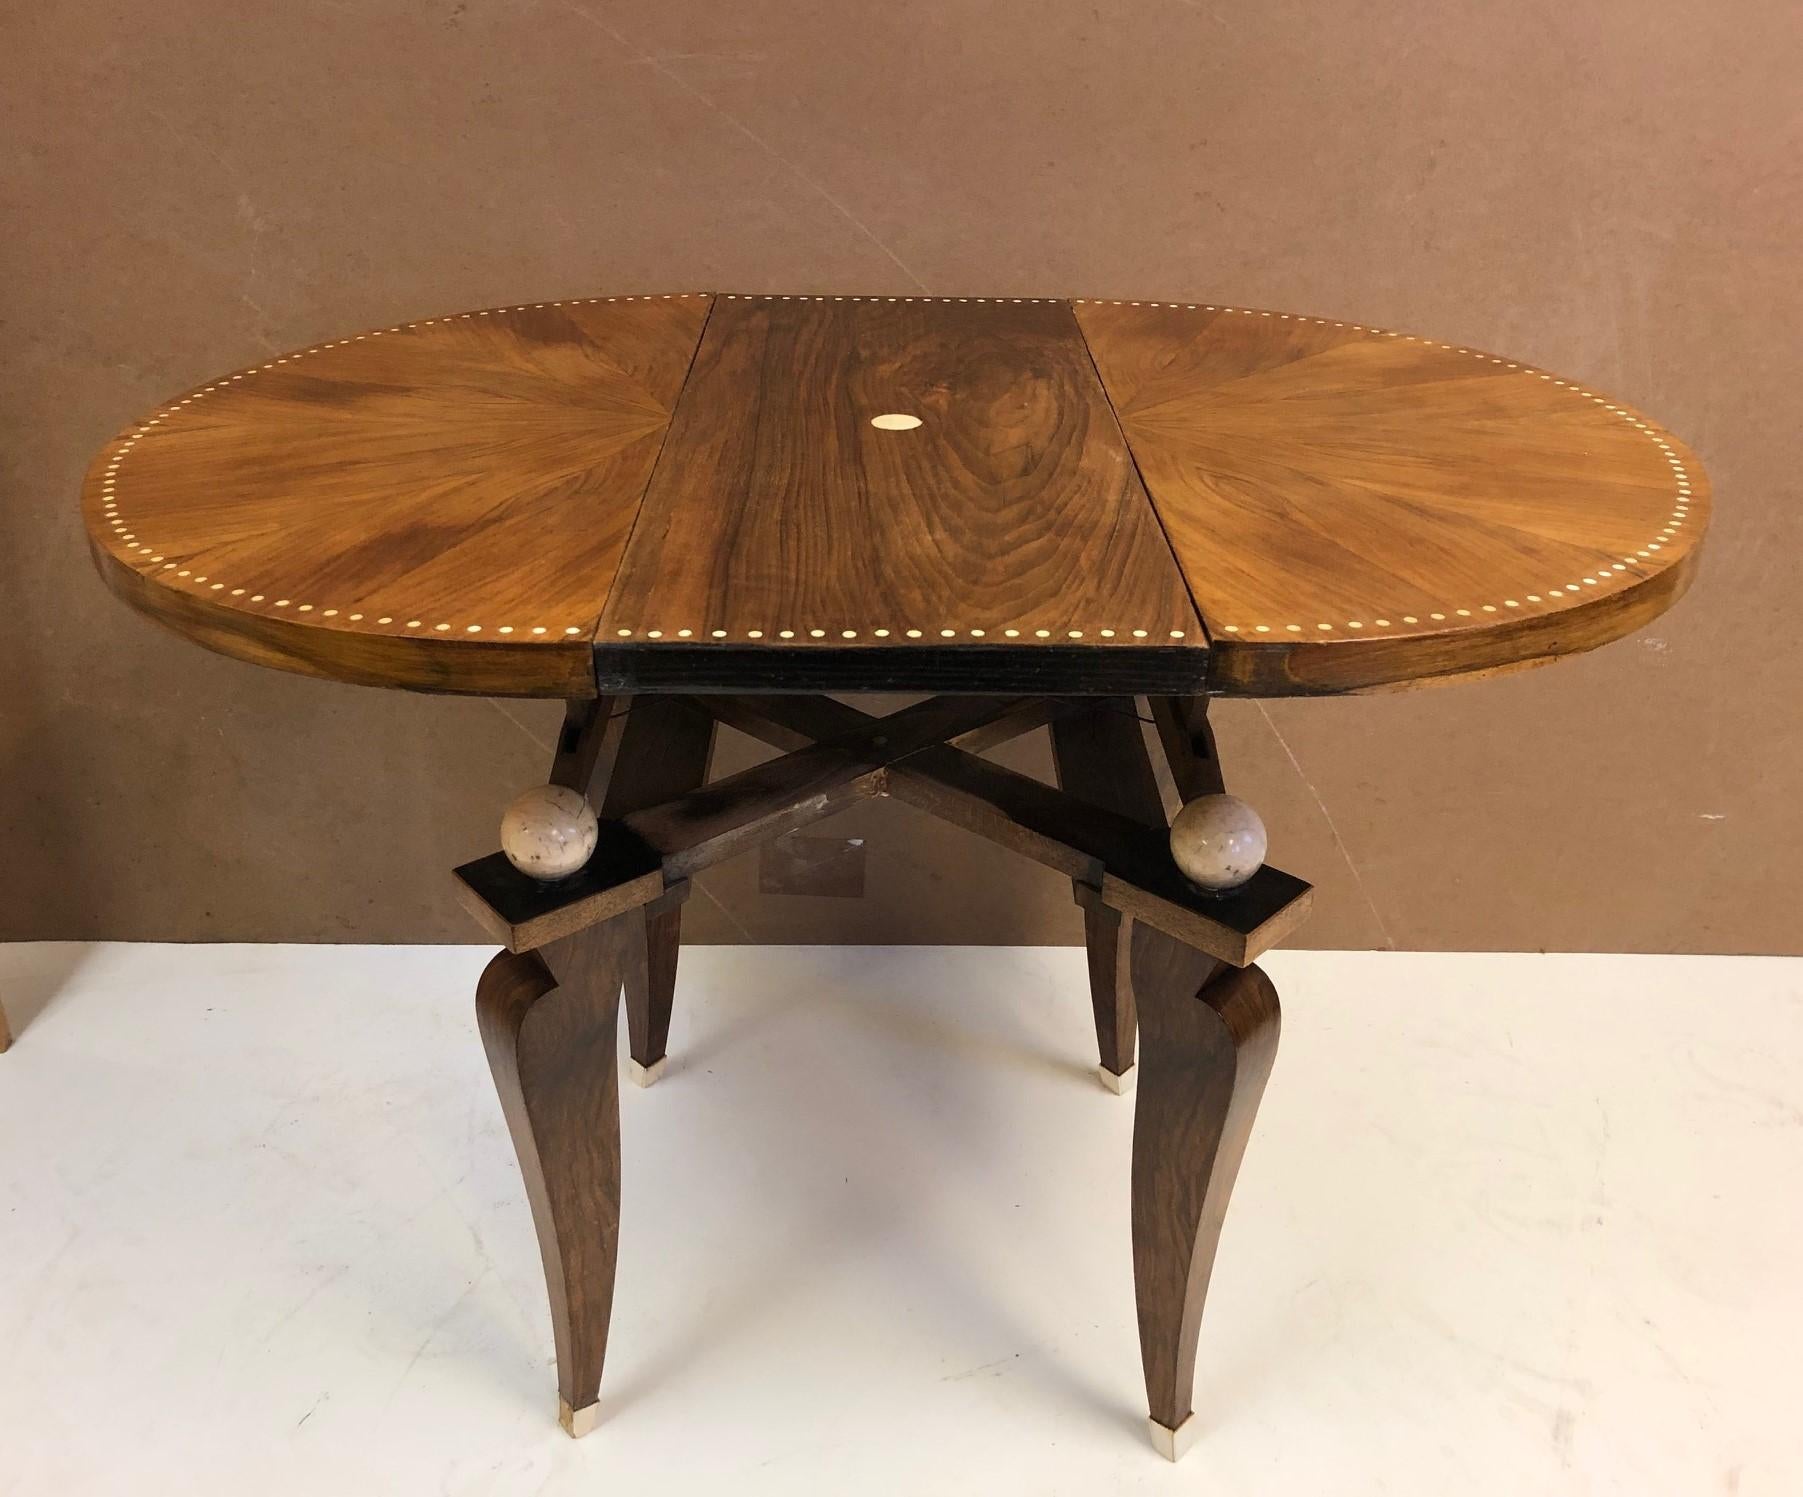 1930s French Art Deco adjustable table. The table is walnut with bone inlay to the top and the sabots are bone as well. Has four round painted accents underneath the tabletop. This table can be adjusted from a side table to a breakfast